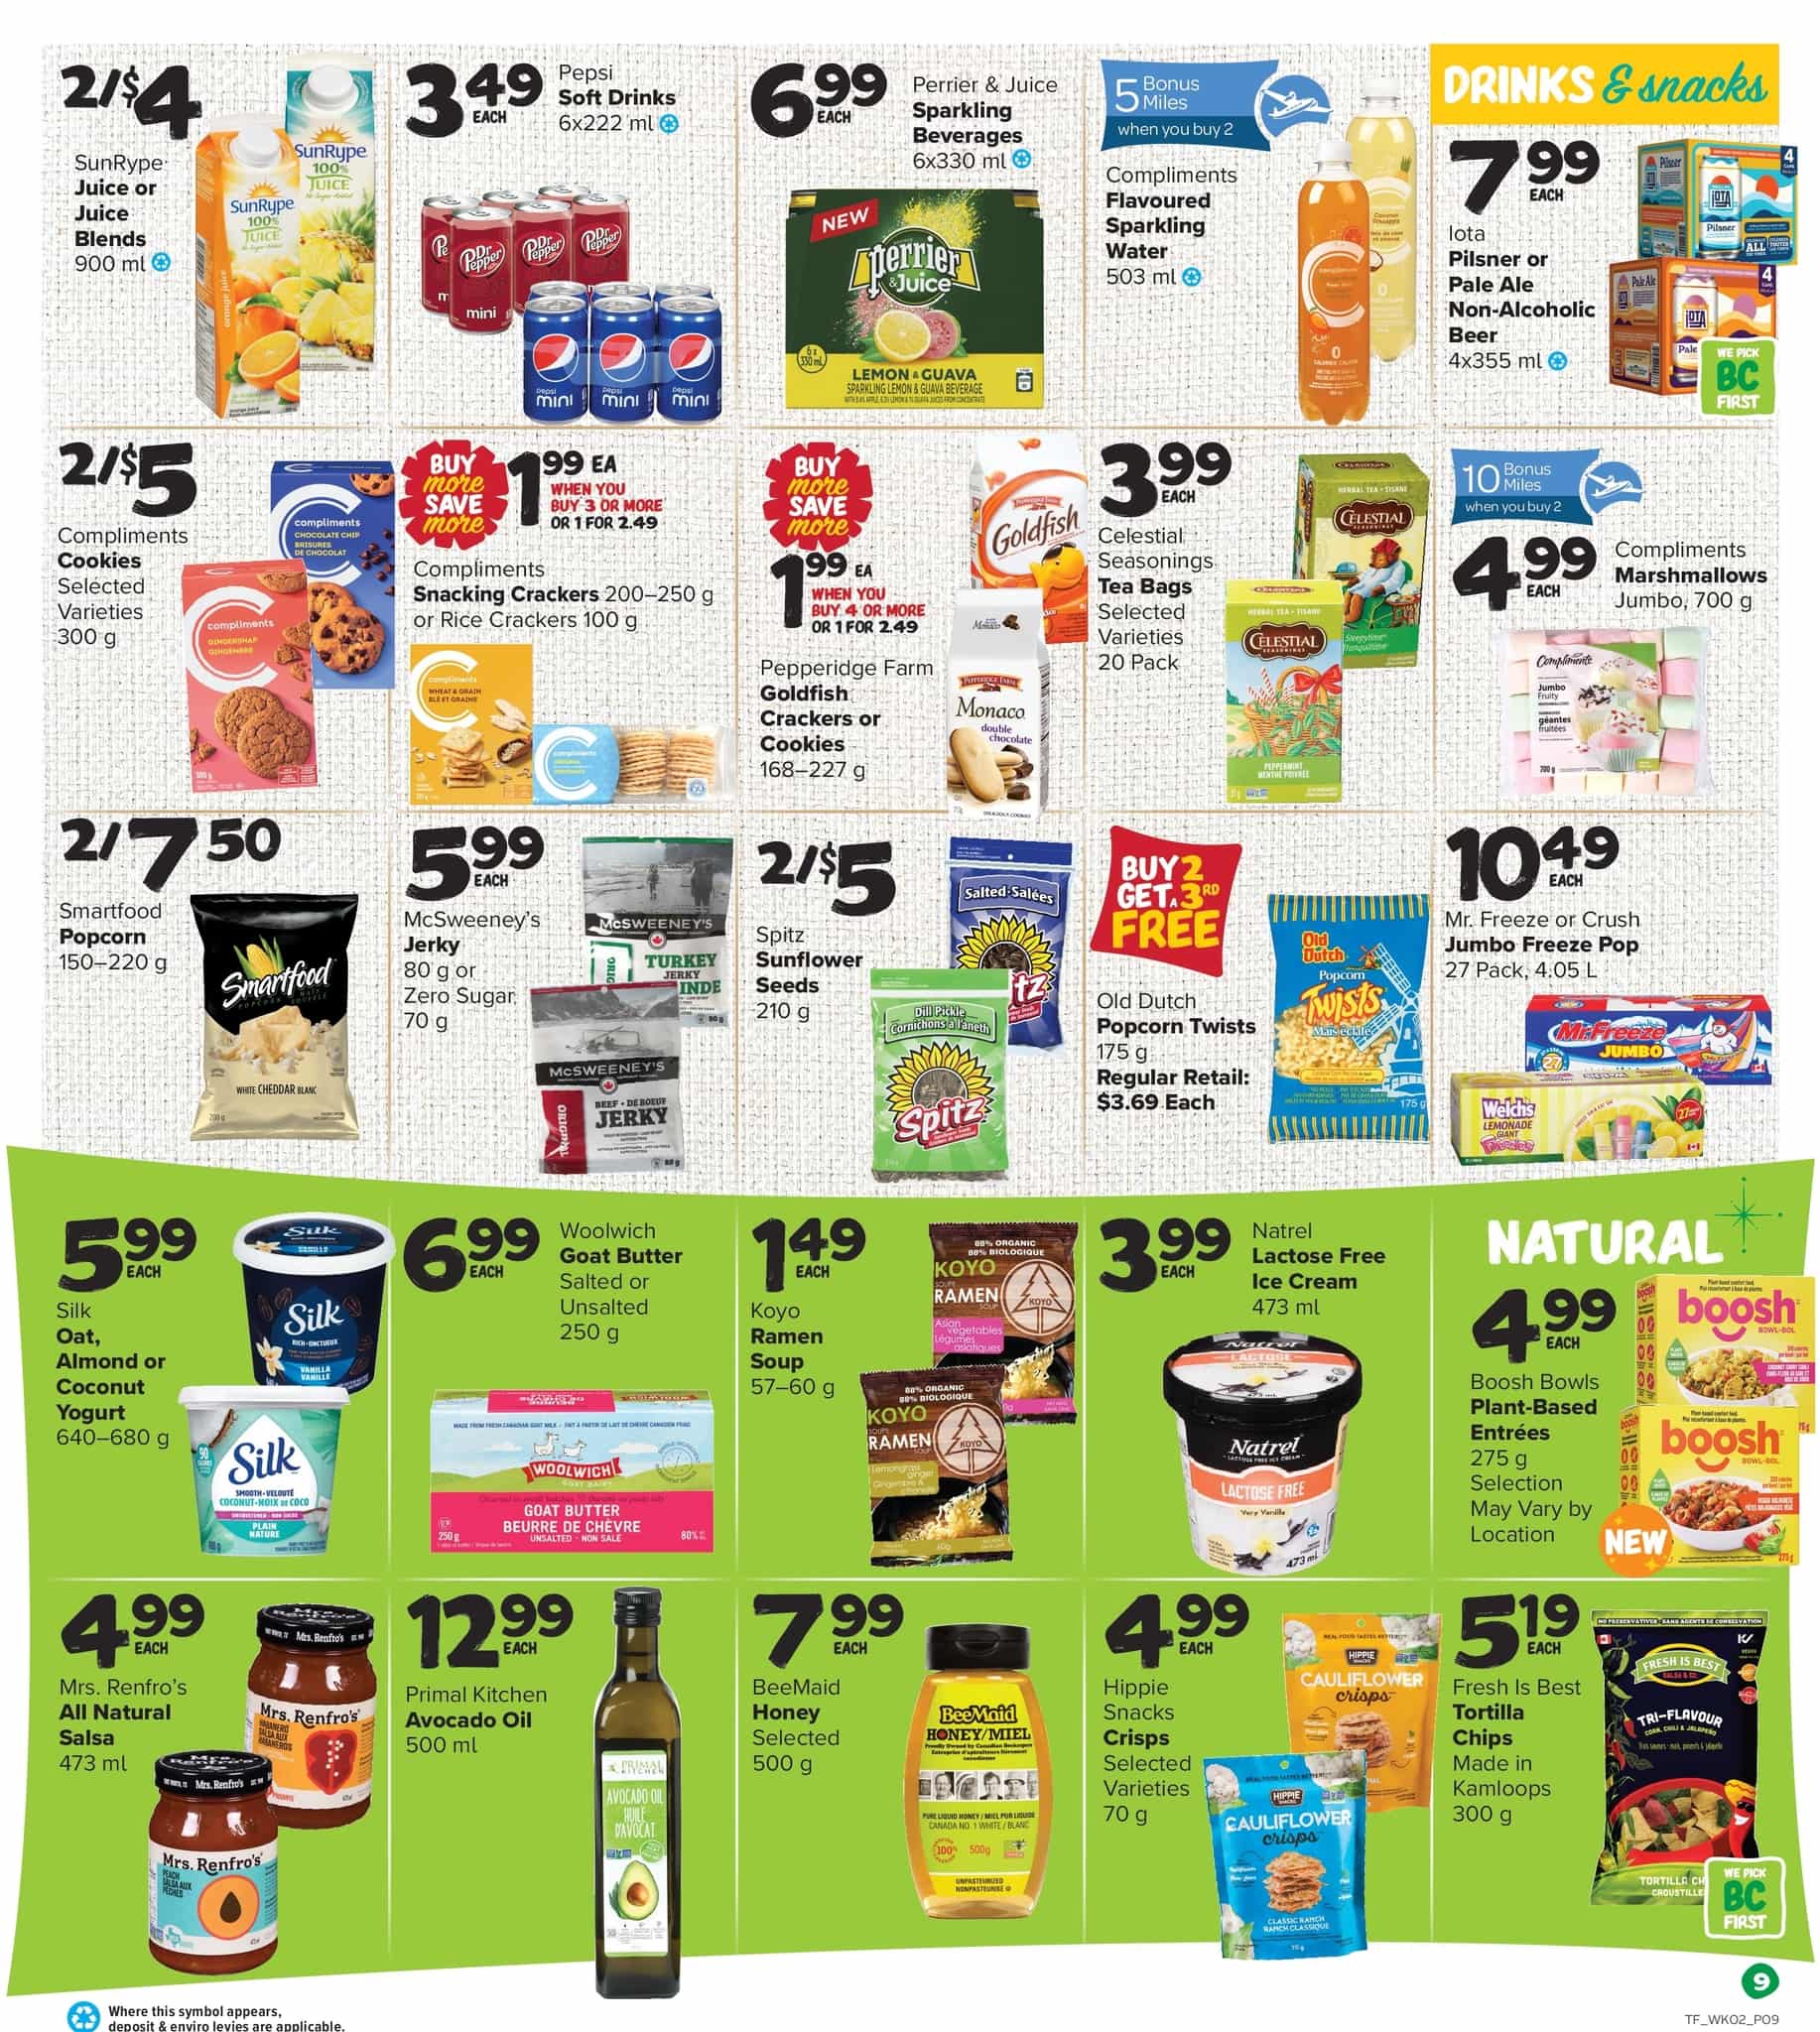 Thrifty Foods - Weekly Flyer Specials - Page 9